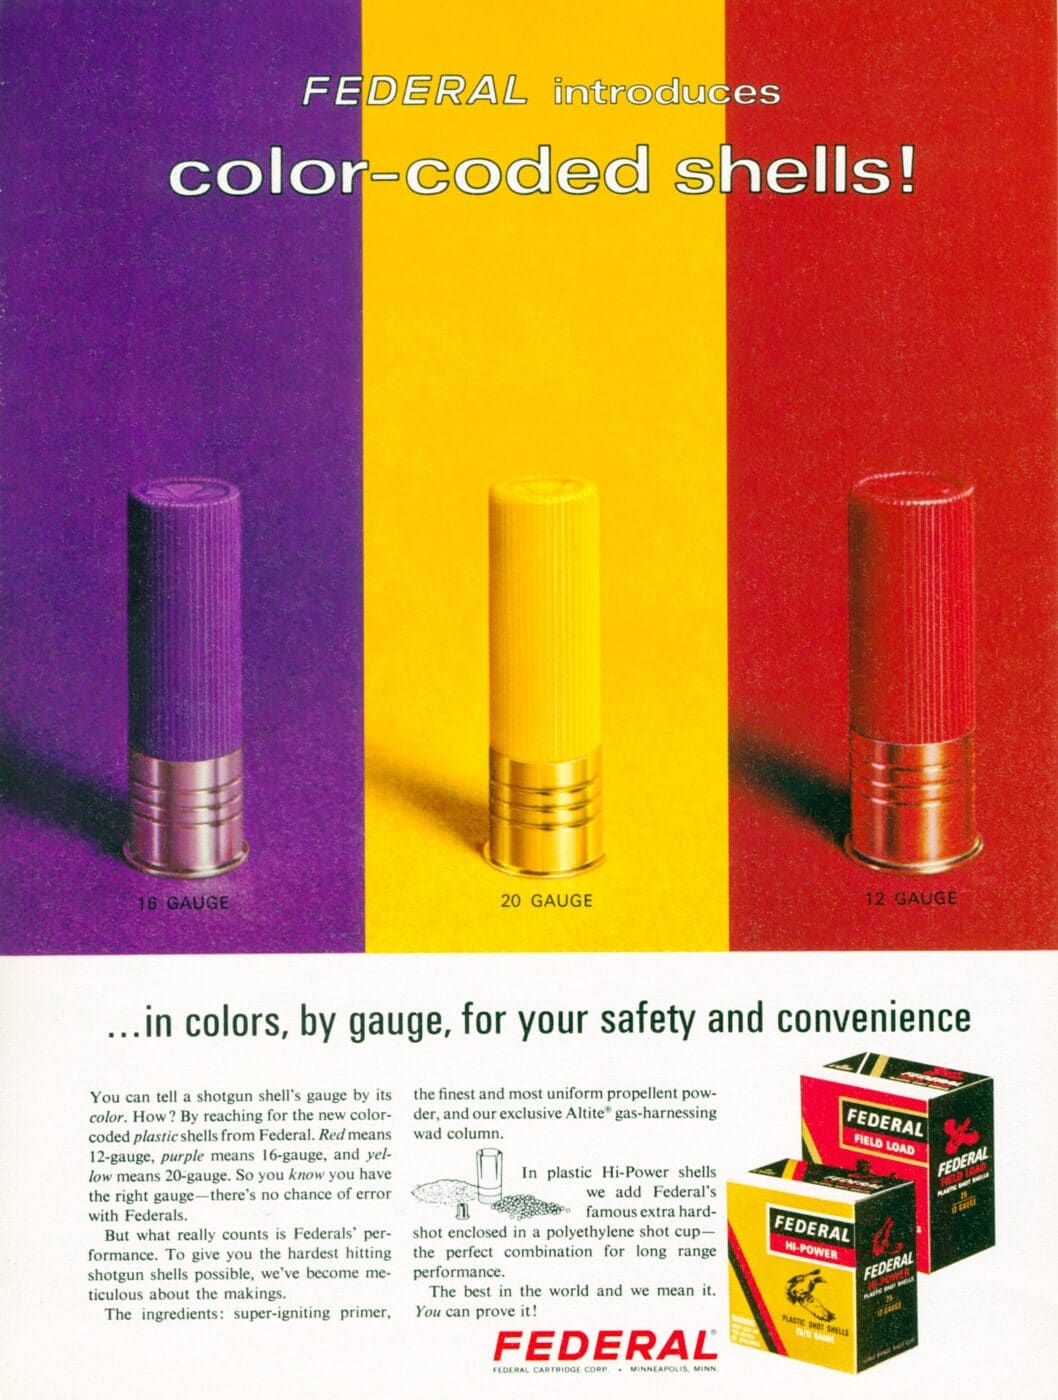 Advertisement from 1966 for color-coded plastic shells by Federal